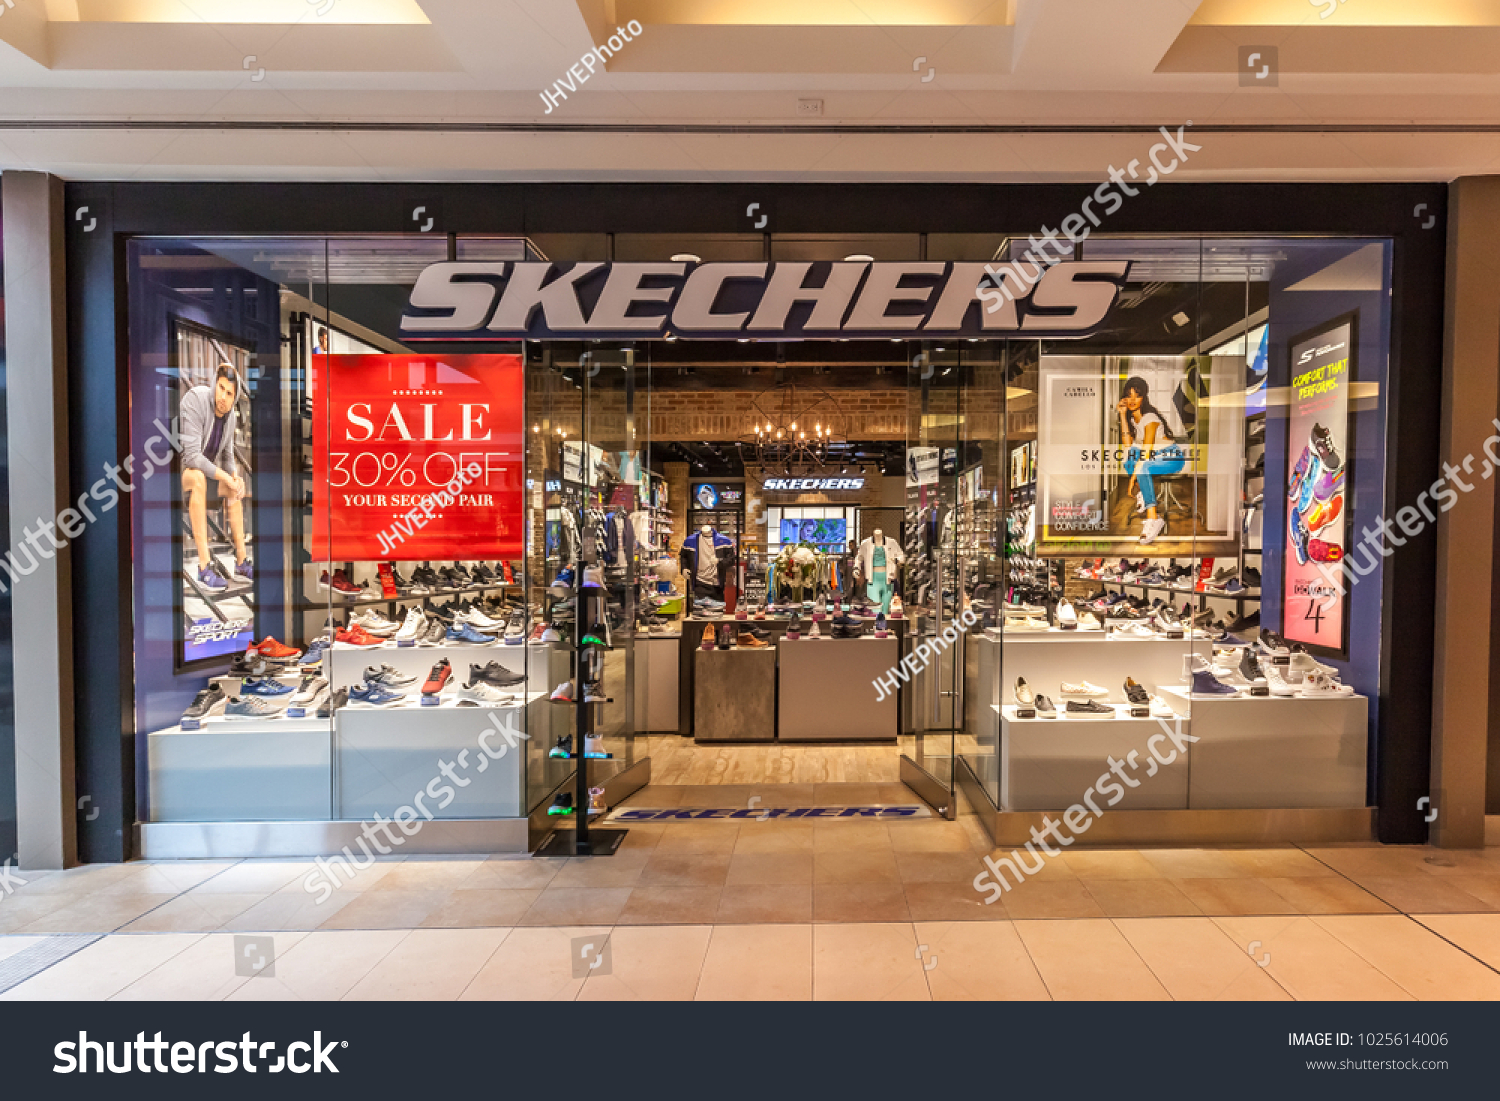 skechers outlet online store canada